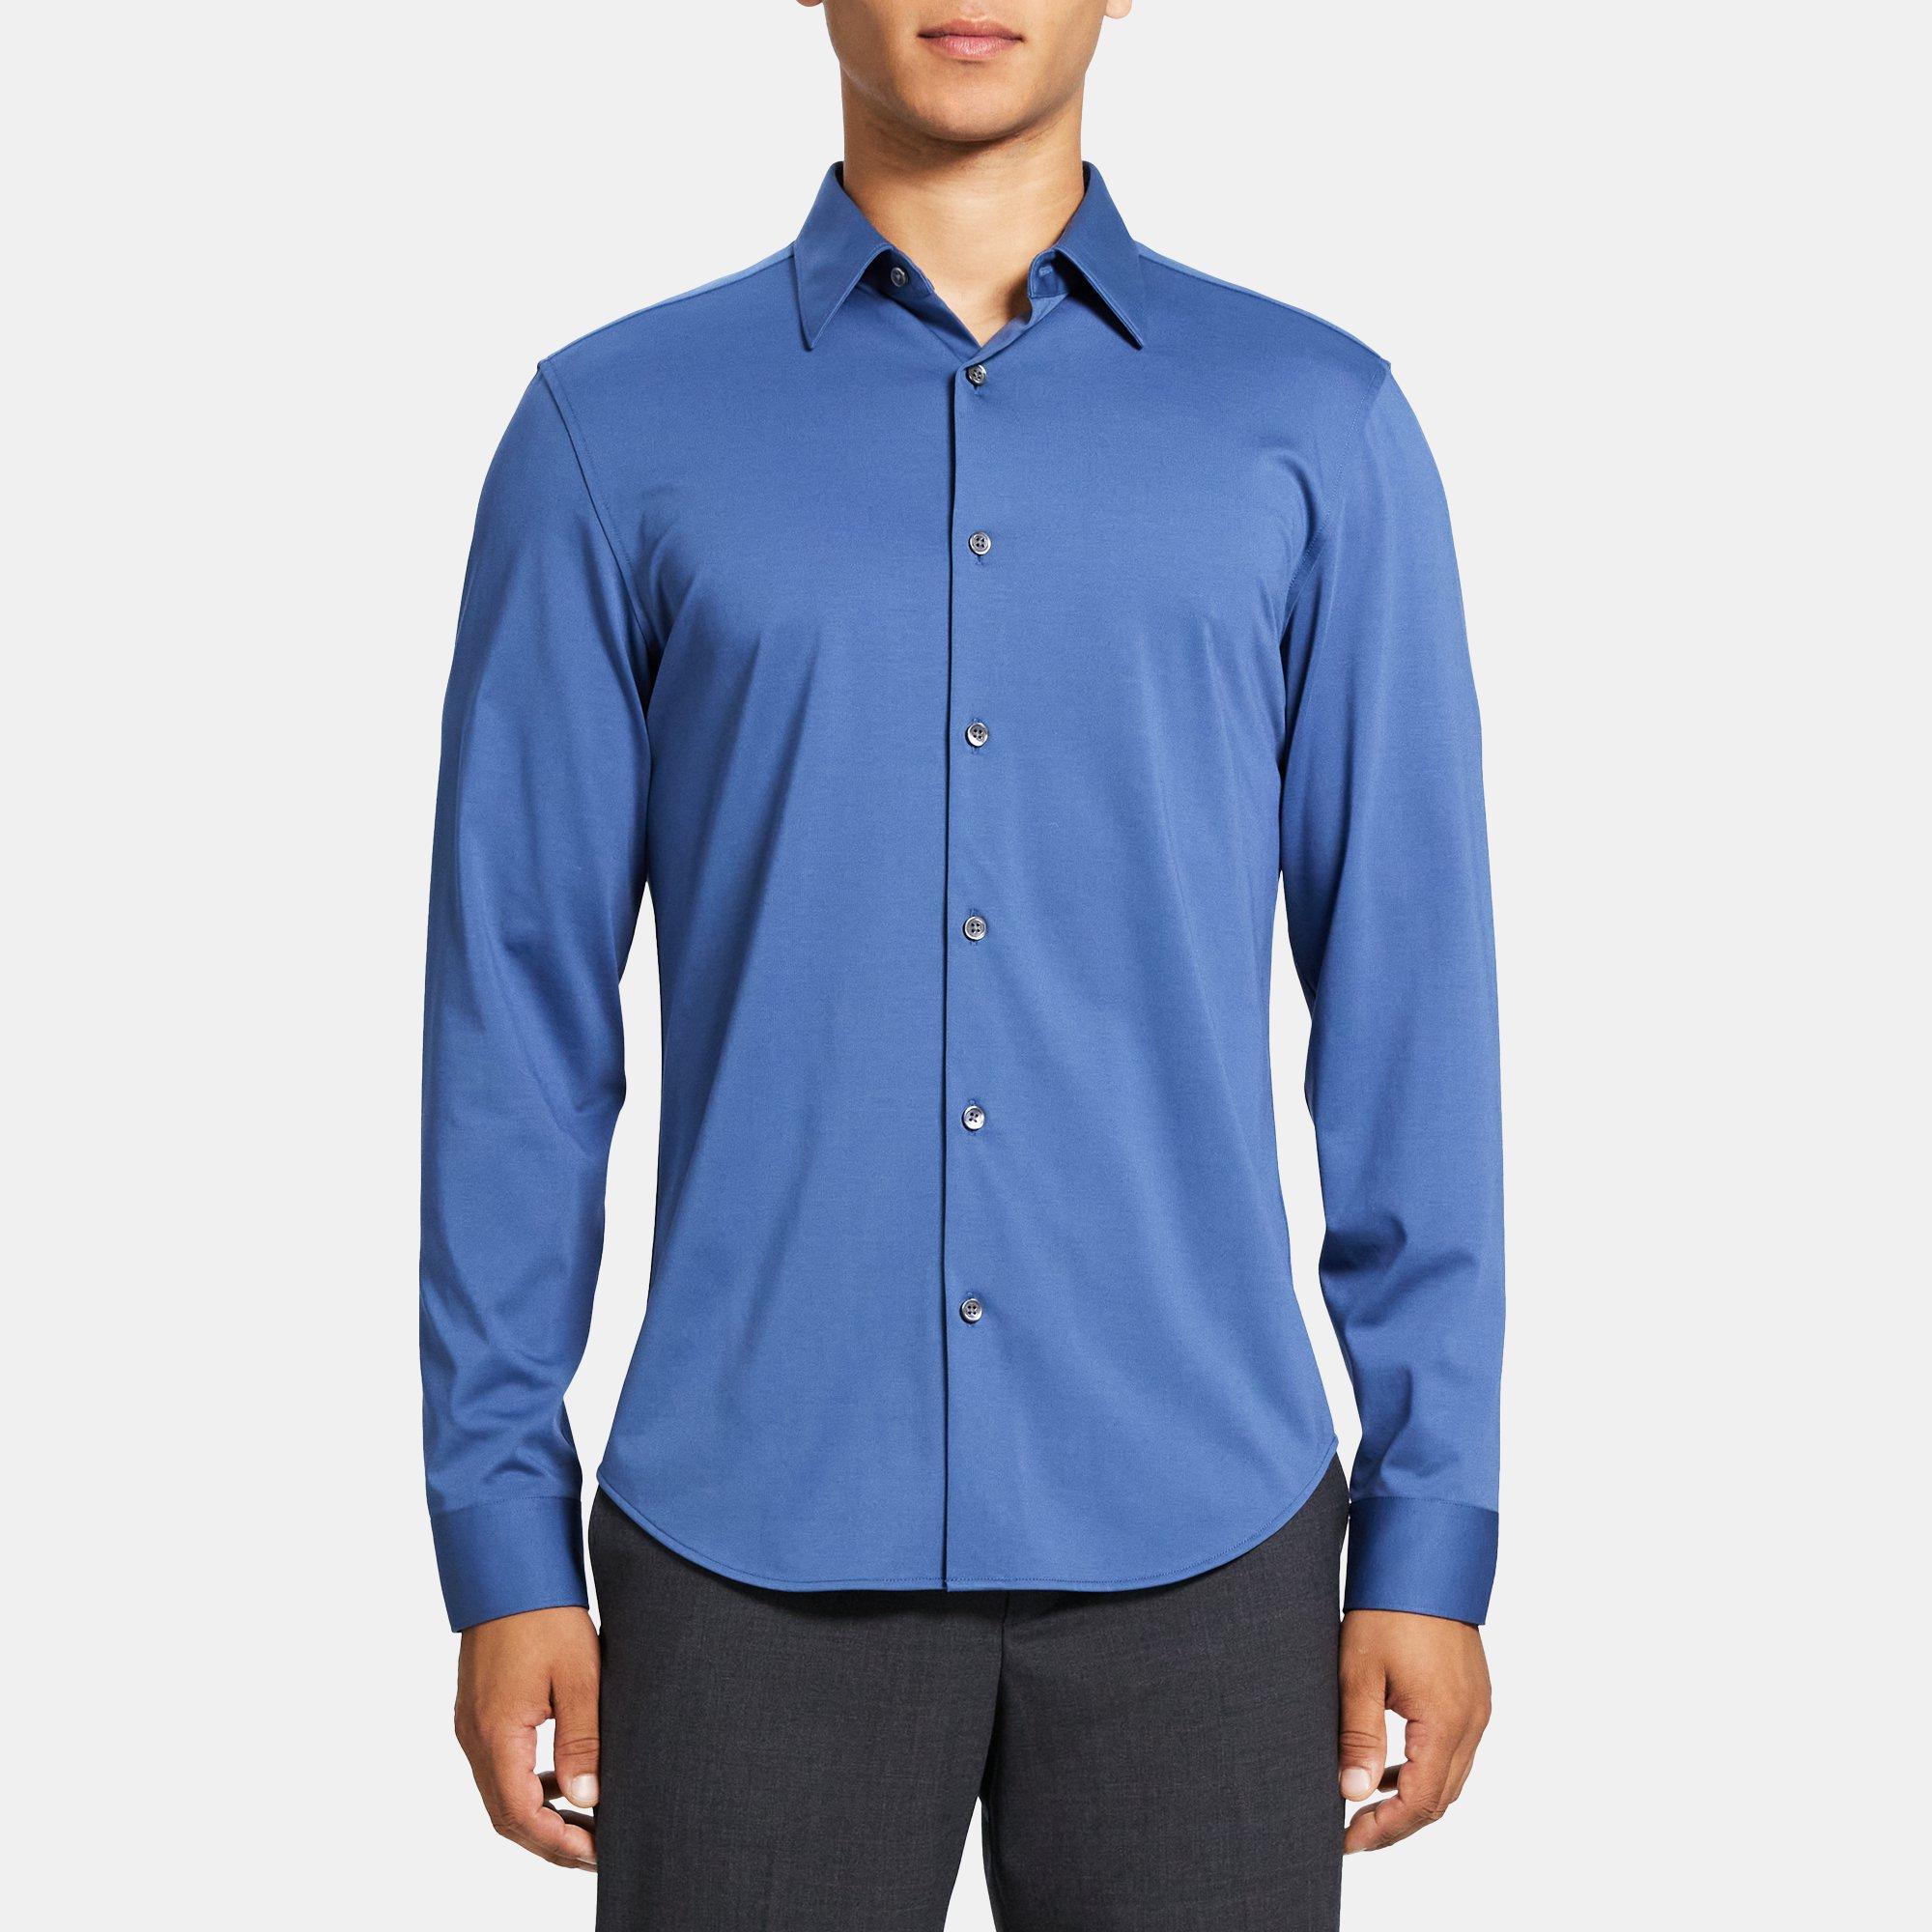 Structure Knit Tailored Shirt | Theory Outlet